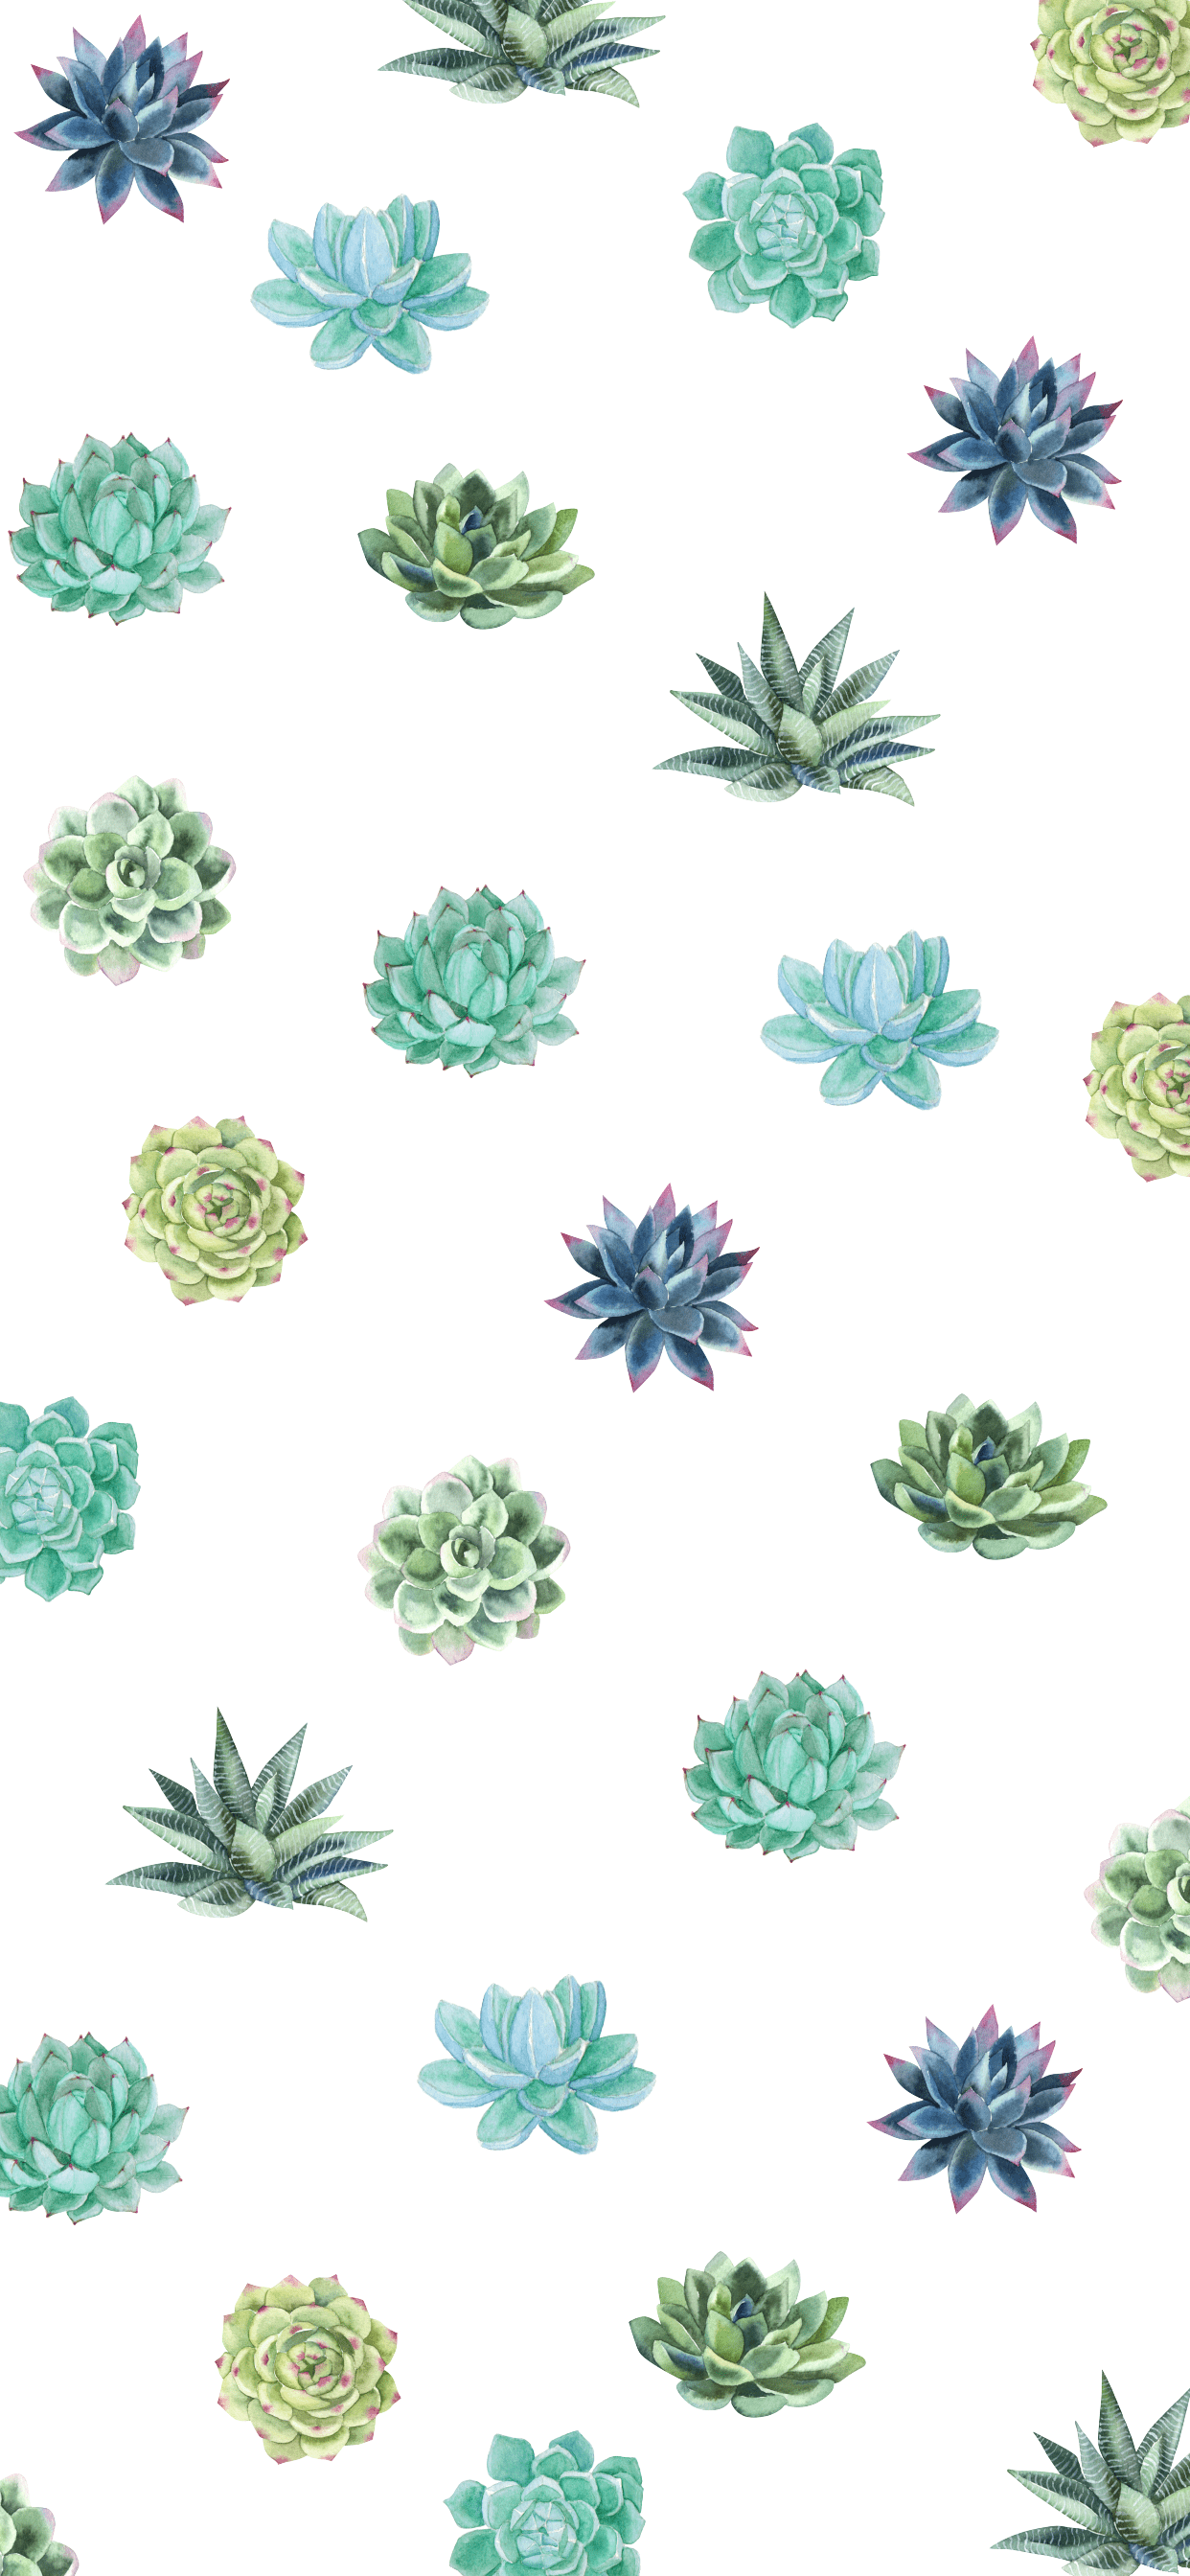 Succulent Iphone Wallpapers Top Free Succulent Iphone Backgrounds Wallpaperaccess Photos, art, growing tips, sales/trades, news, stories. succulent iphone wallpapers top free